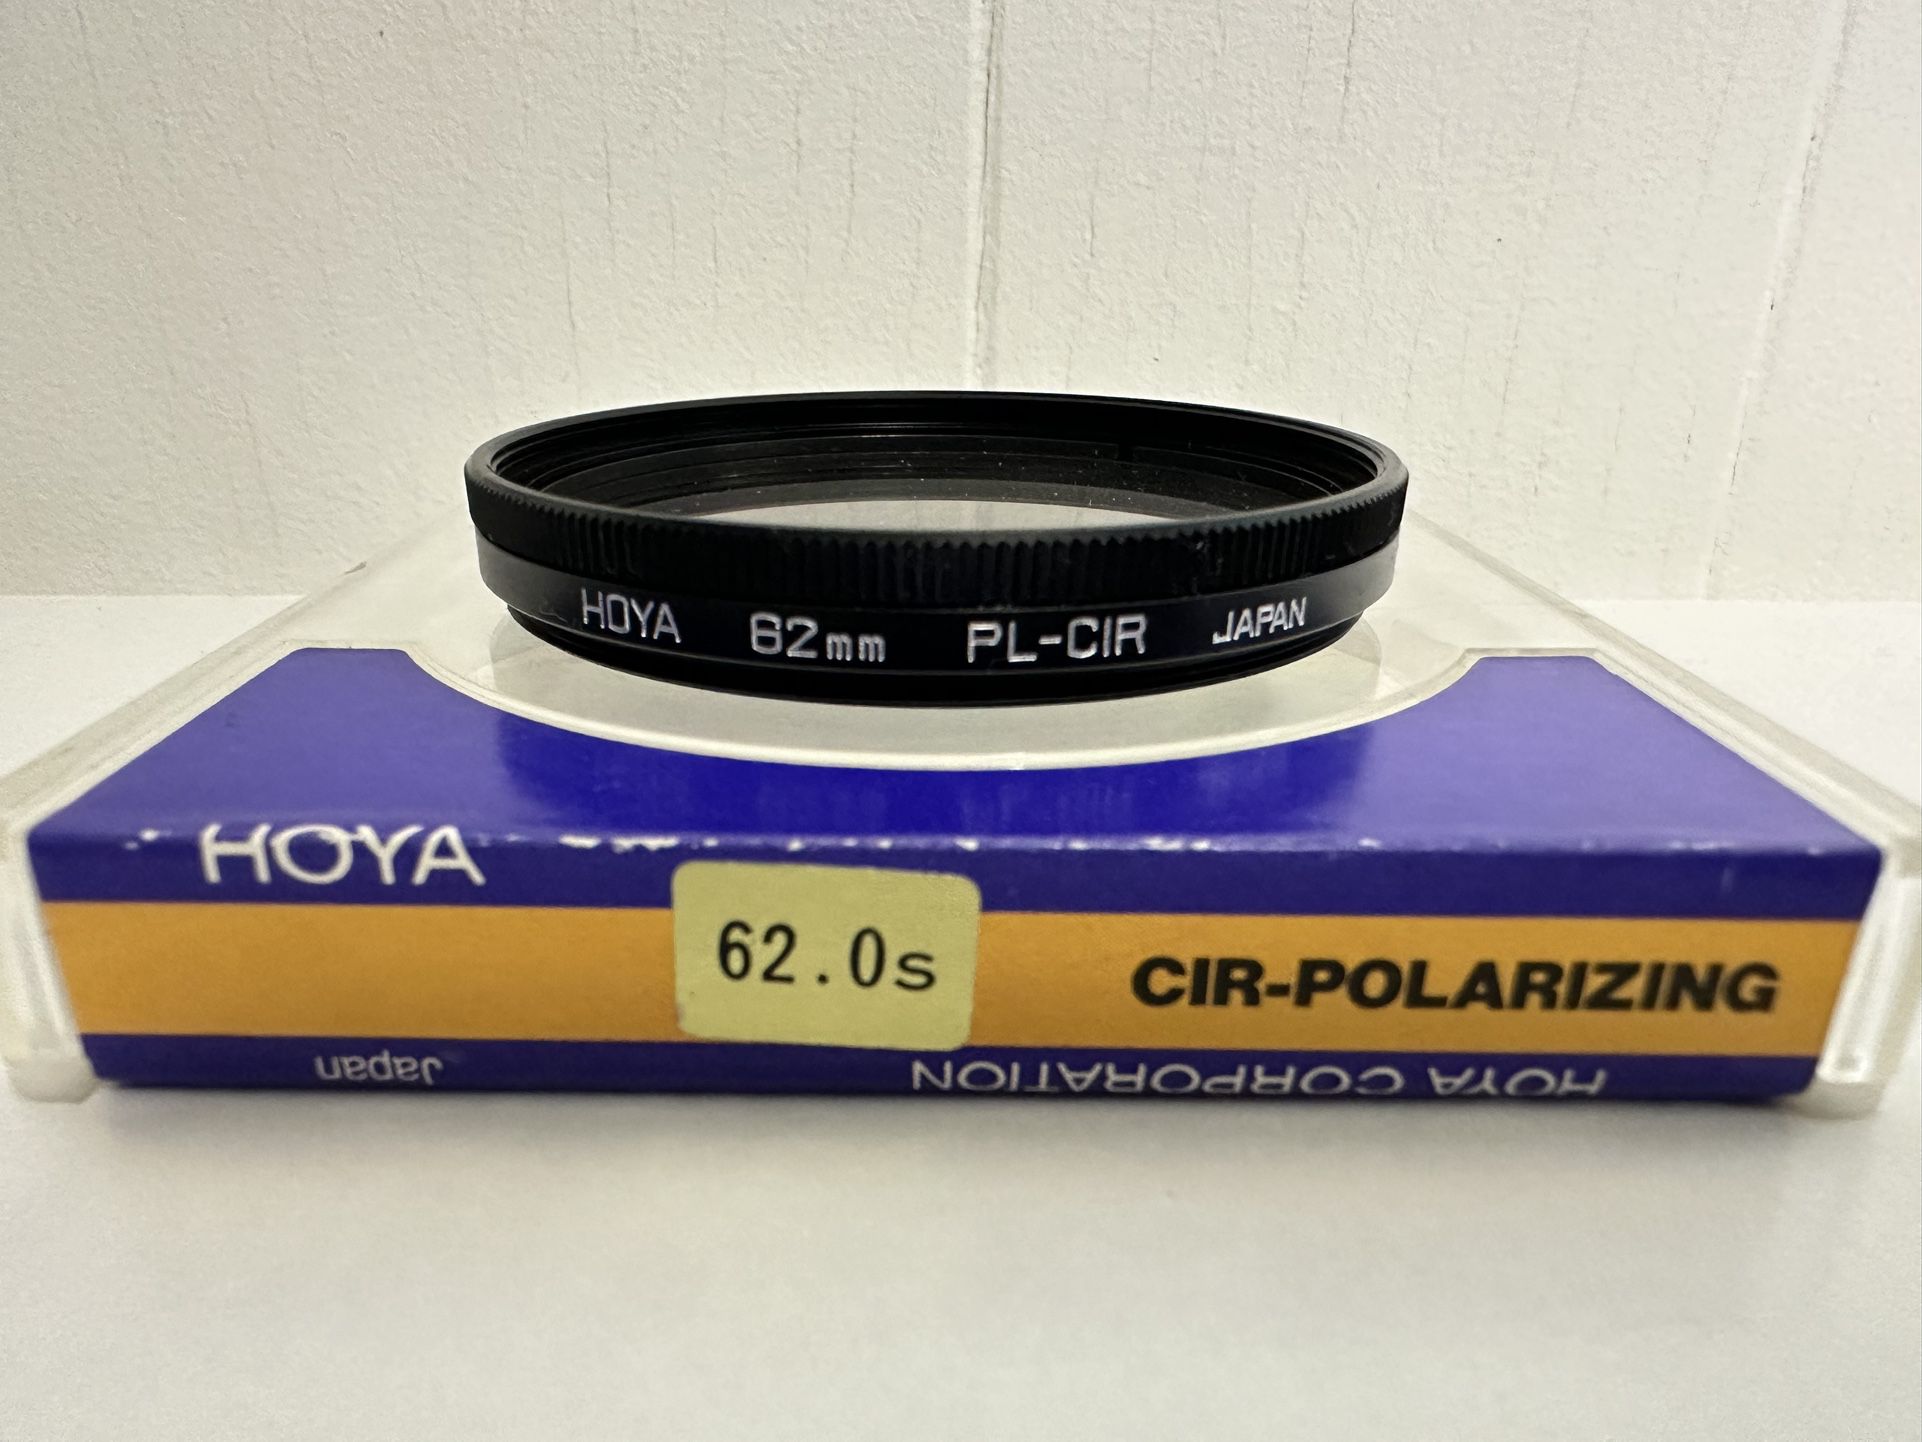 Circular Polarized Filter for Photography. Excellent!!